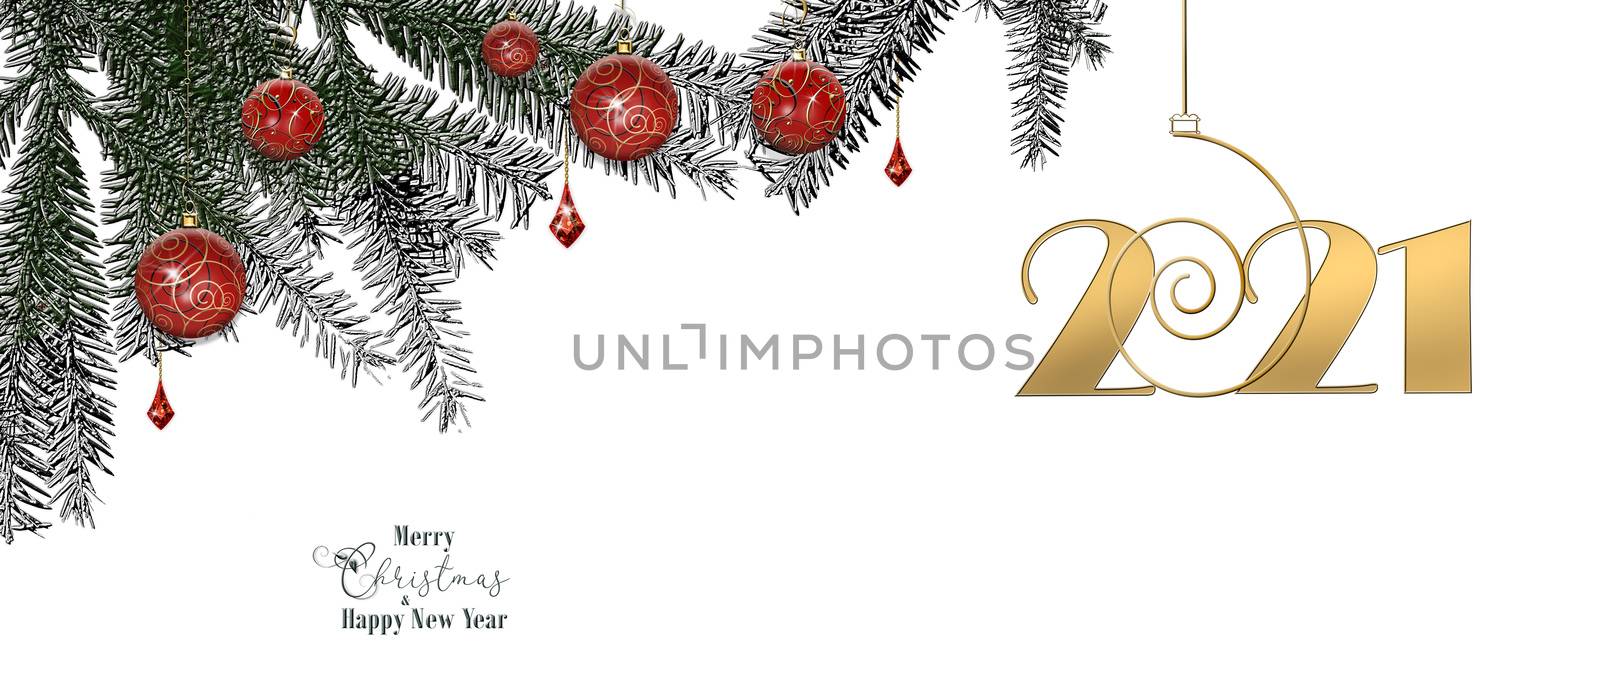 2021 Happy New Year border, Xmas garland with red baubles and digit 2021 hanging on fir branches. Horizontal Christmas poster, greeting card, header. Text Merry Christmas Happy New Year. 3D render